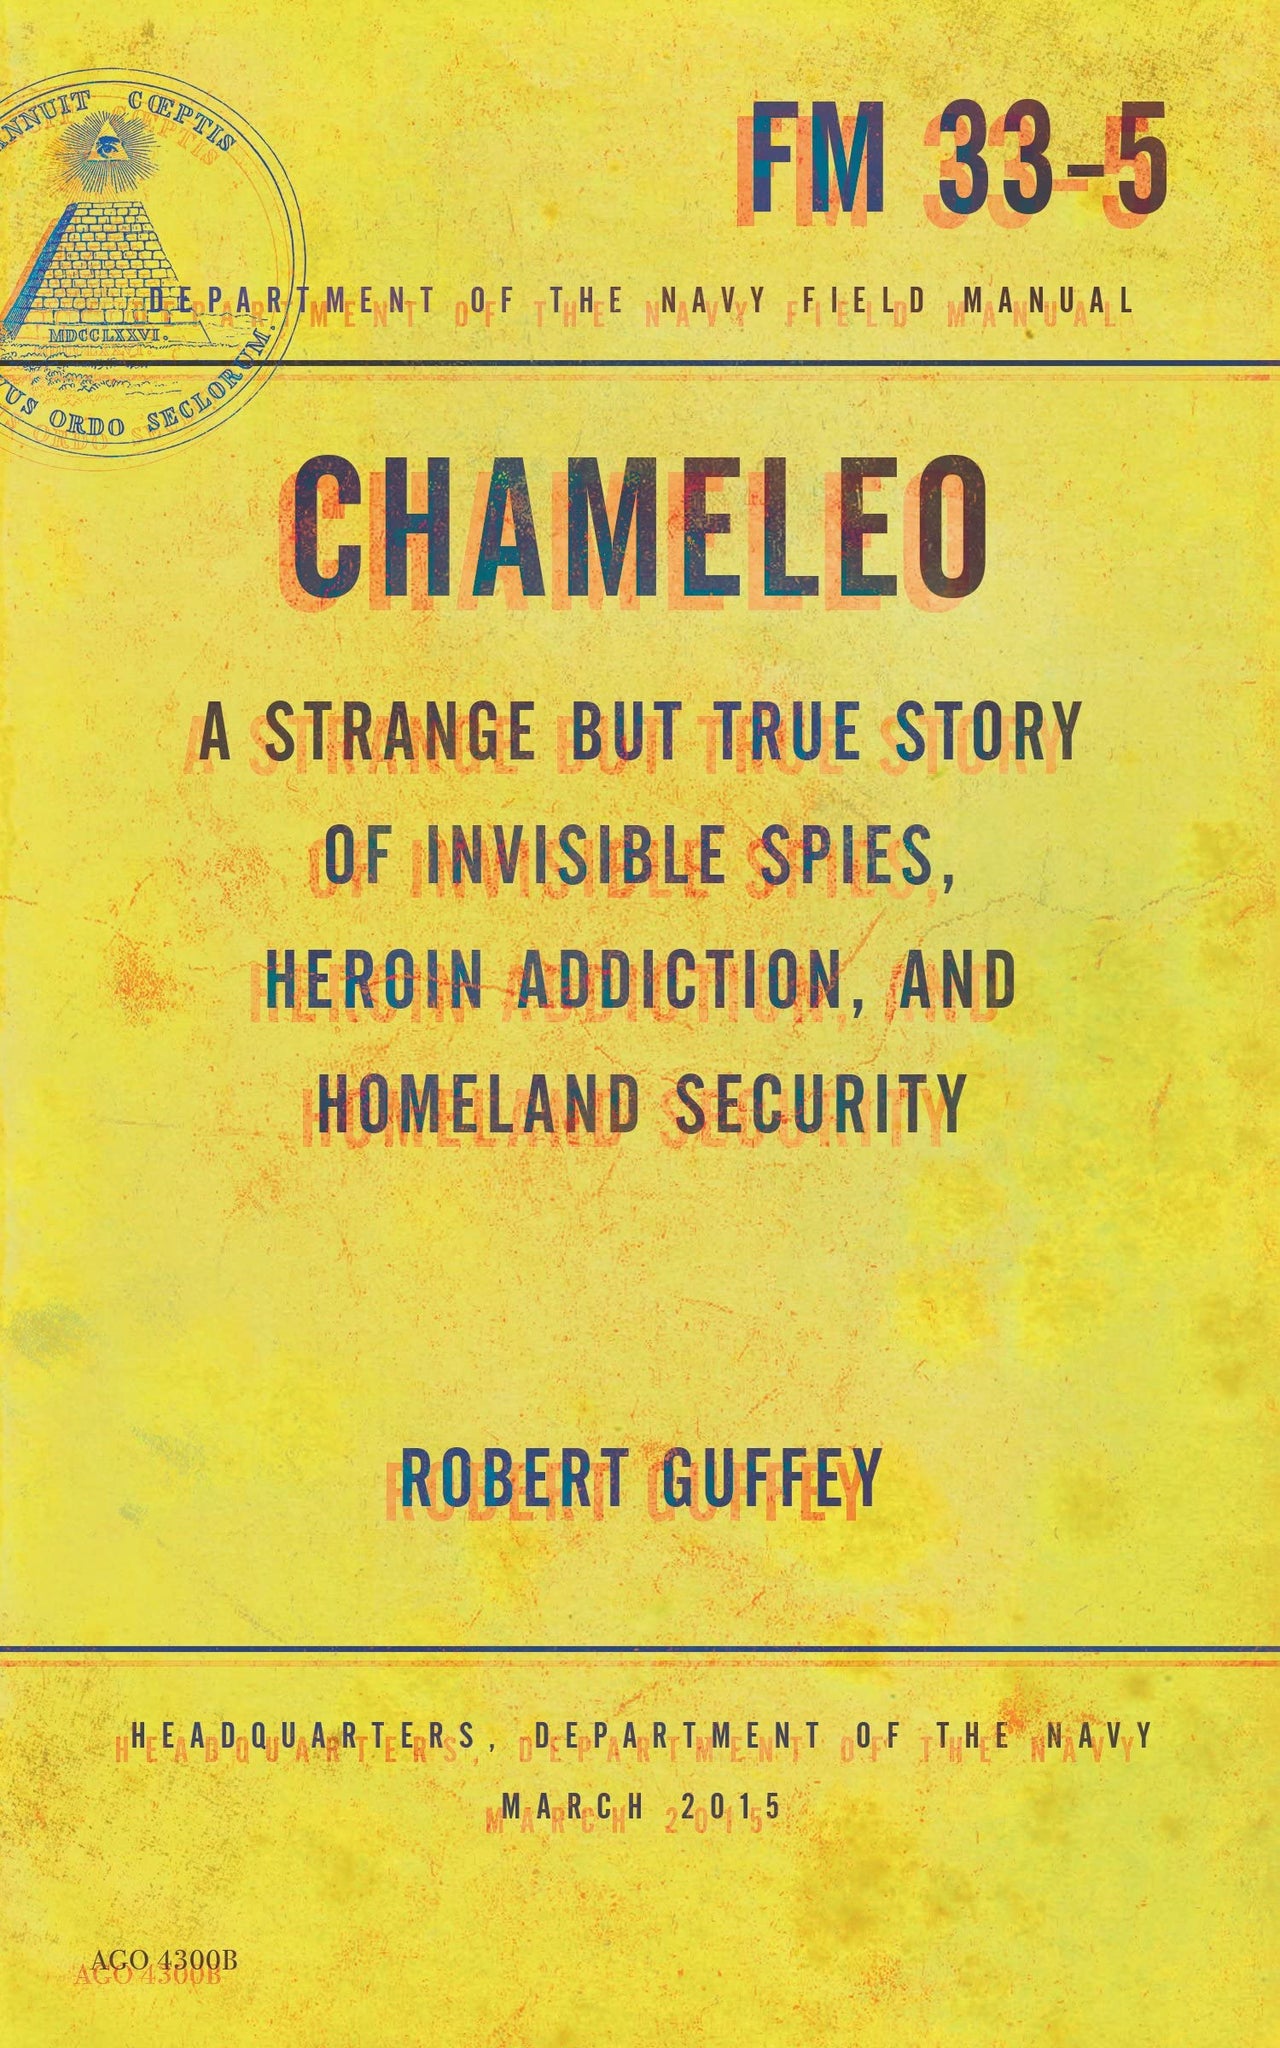 Chameleo : A Strange But True Story of Invisible Spies, Heroin Addiction & Homeland Security by Robert Guffey